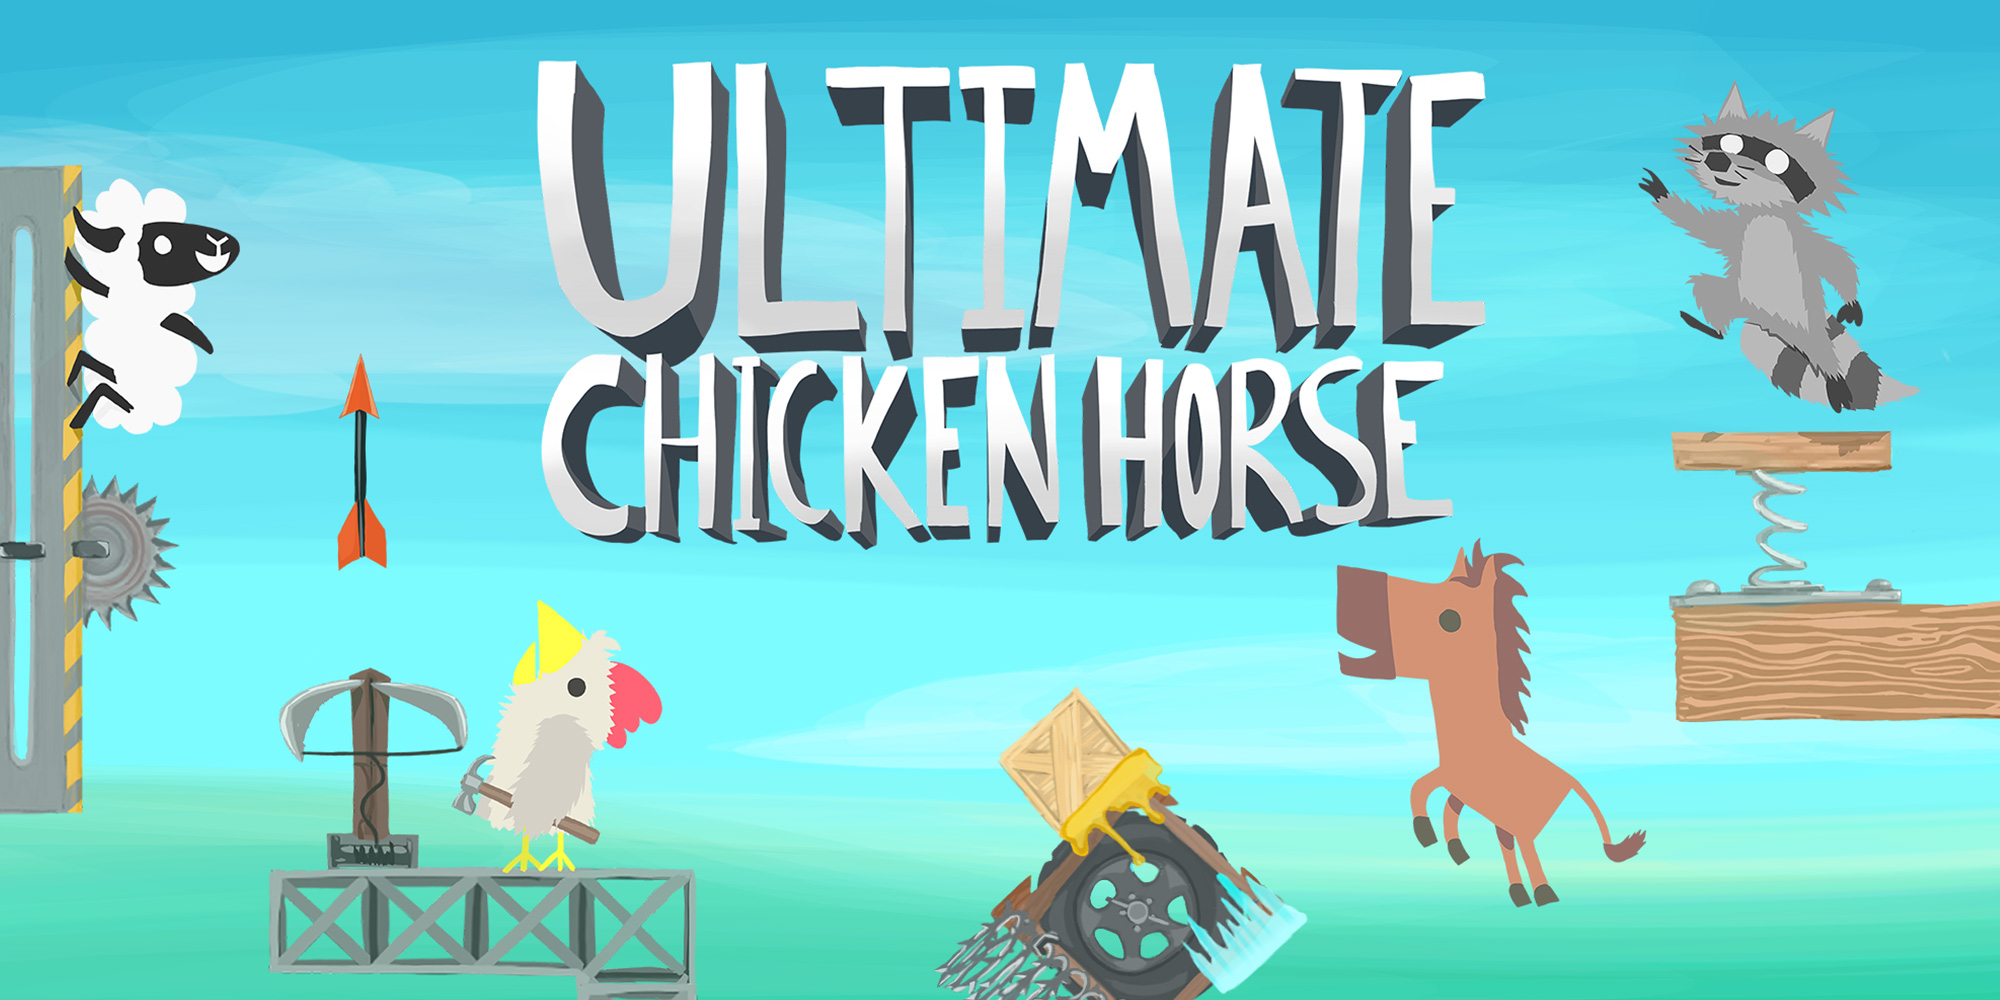 ULTIMATE CHICKEN HORSE free game for windows Update Jan 2022